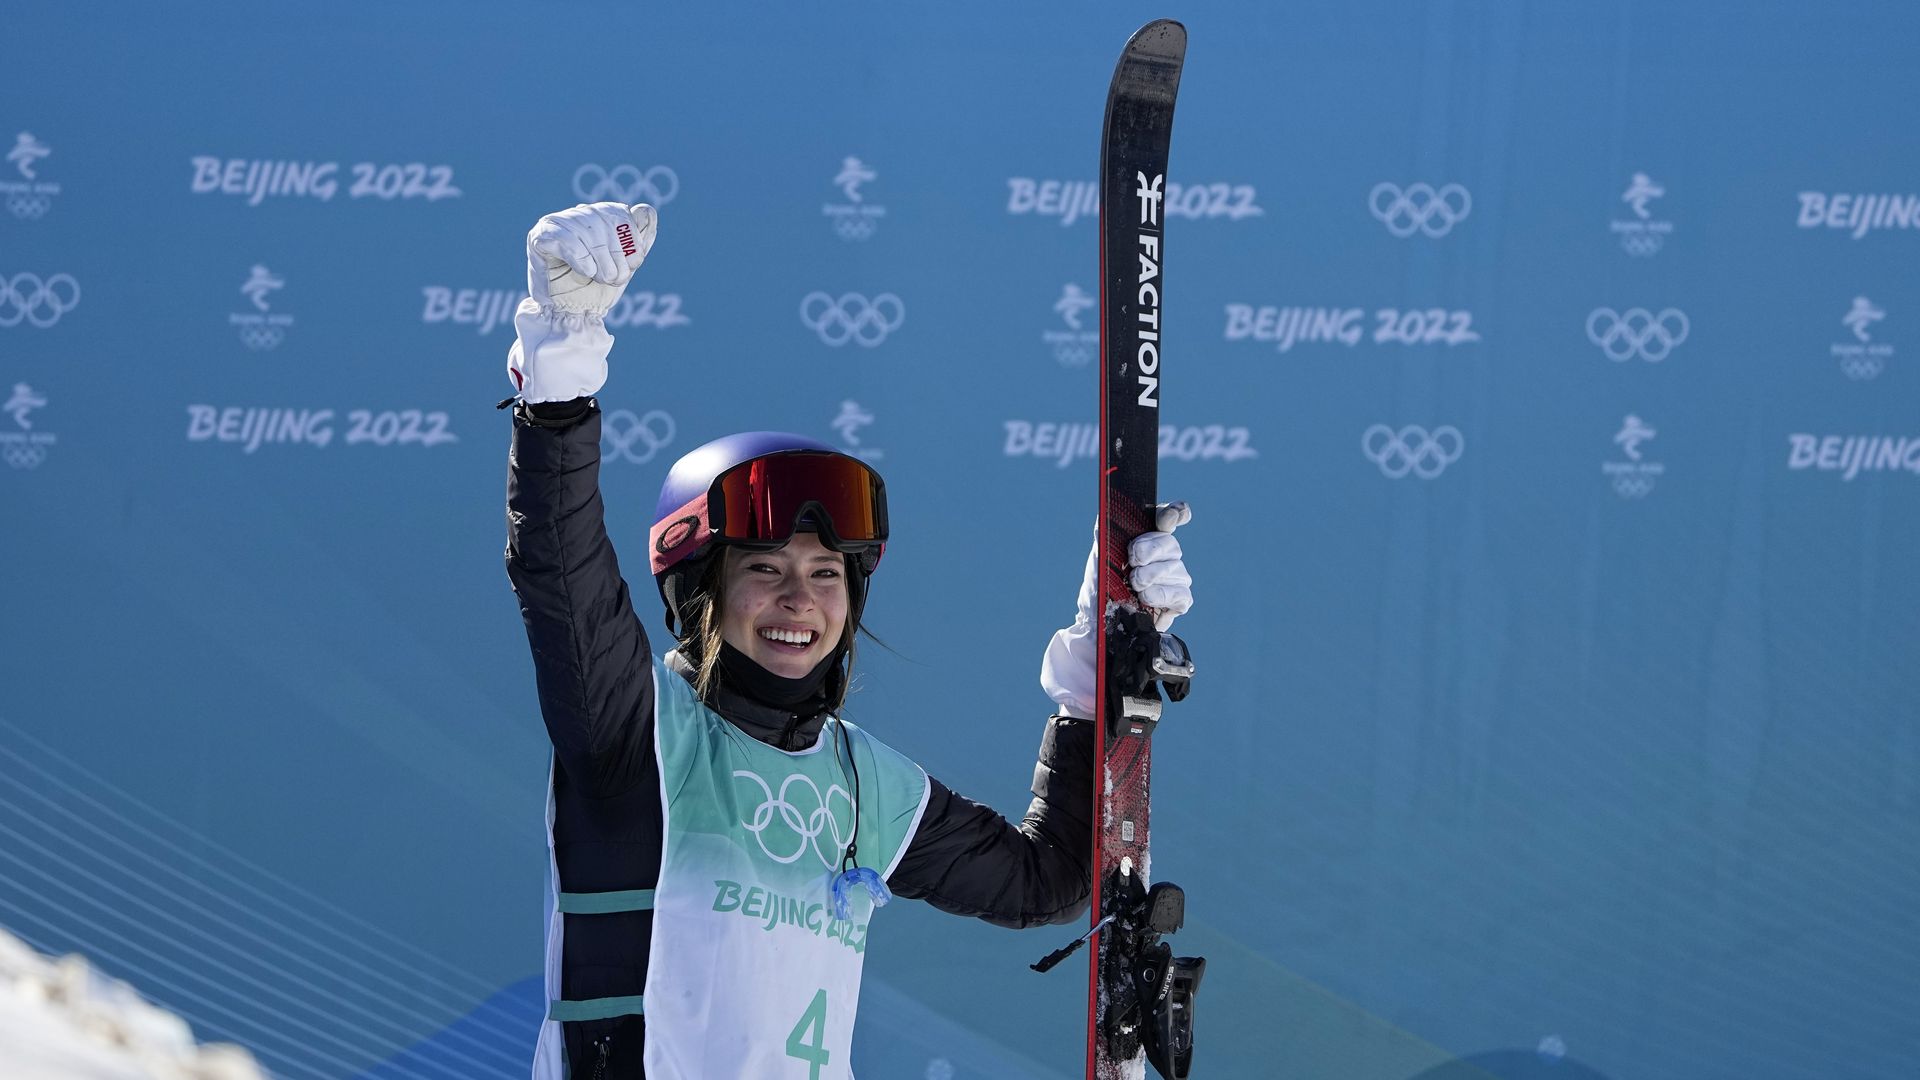 Eileen Gu, of China, reacts after winning the women's freestyle skiing big air finals of the 2022 Winter Olympics, Tuesday, Feb. 8, 2022, in Beijing.